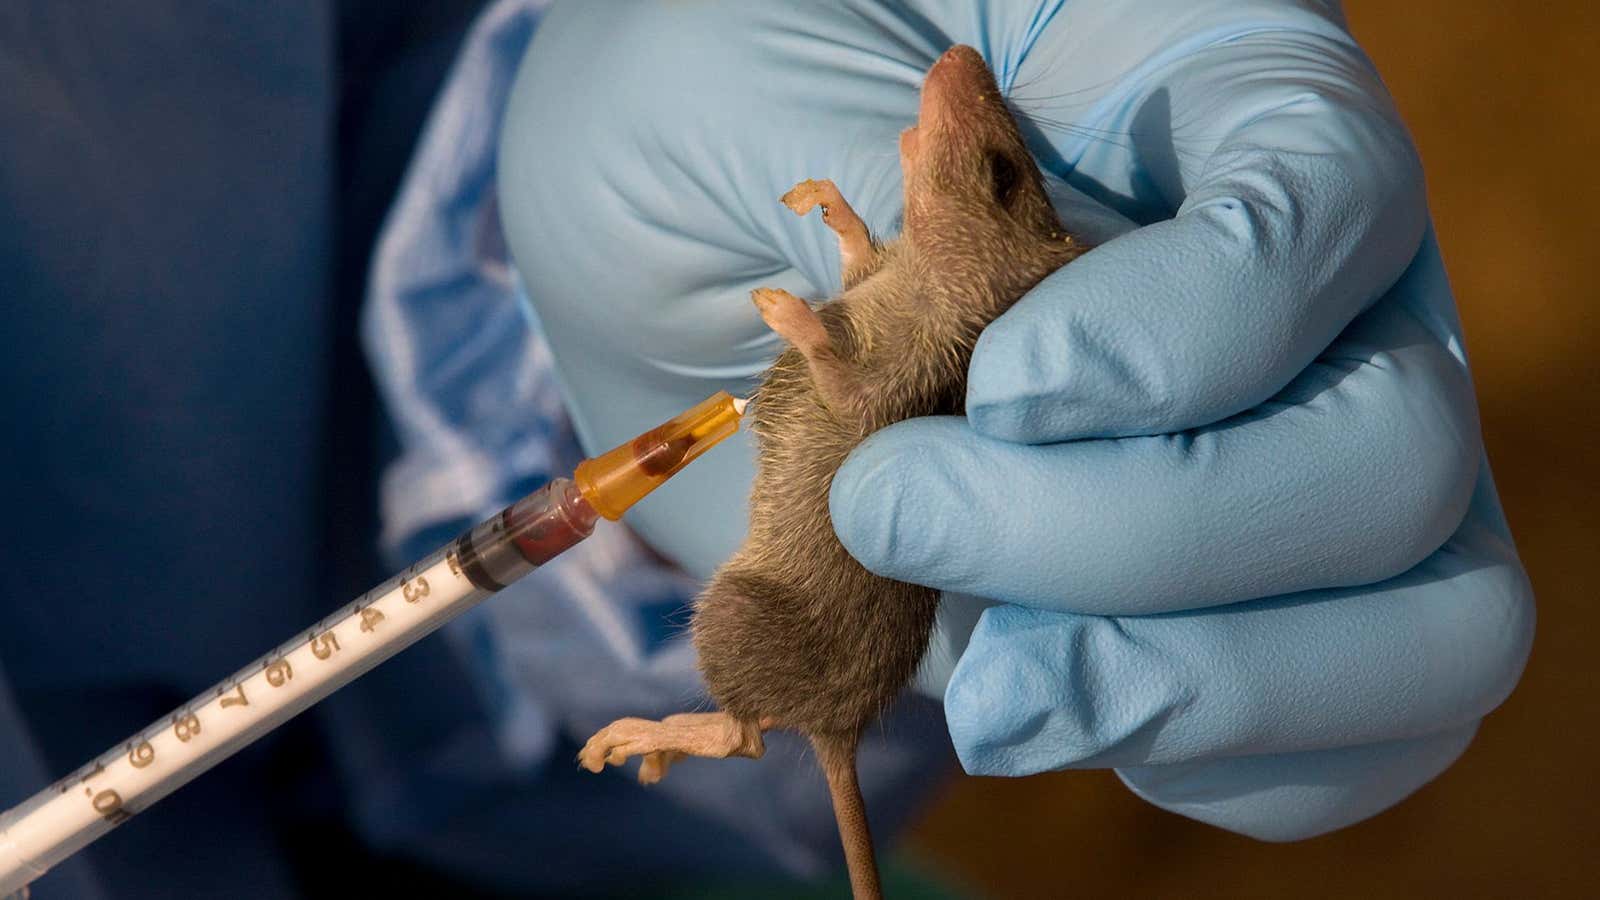 An ecologist extracts a sample of blood from a Mastomys Natalensis rodent